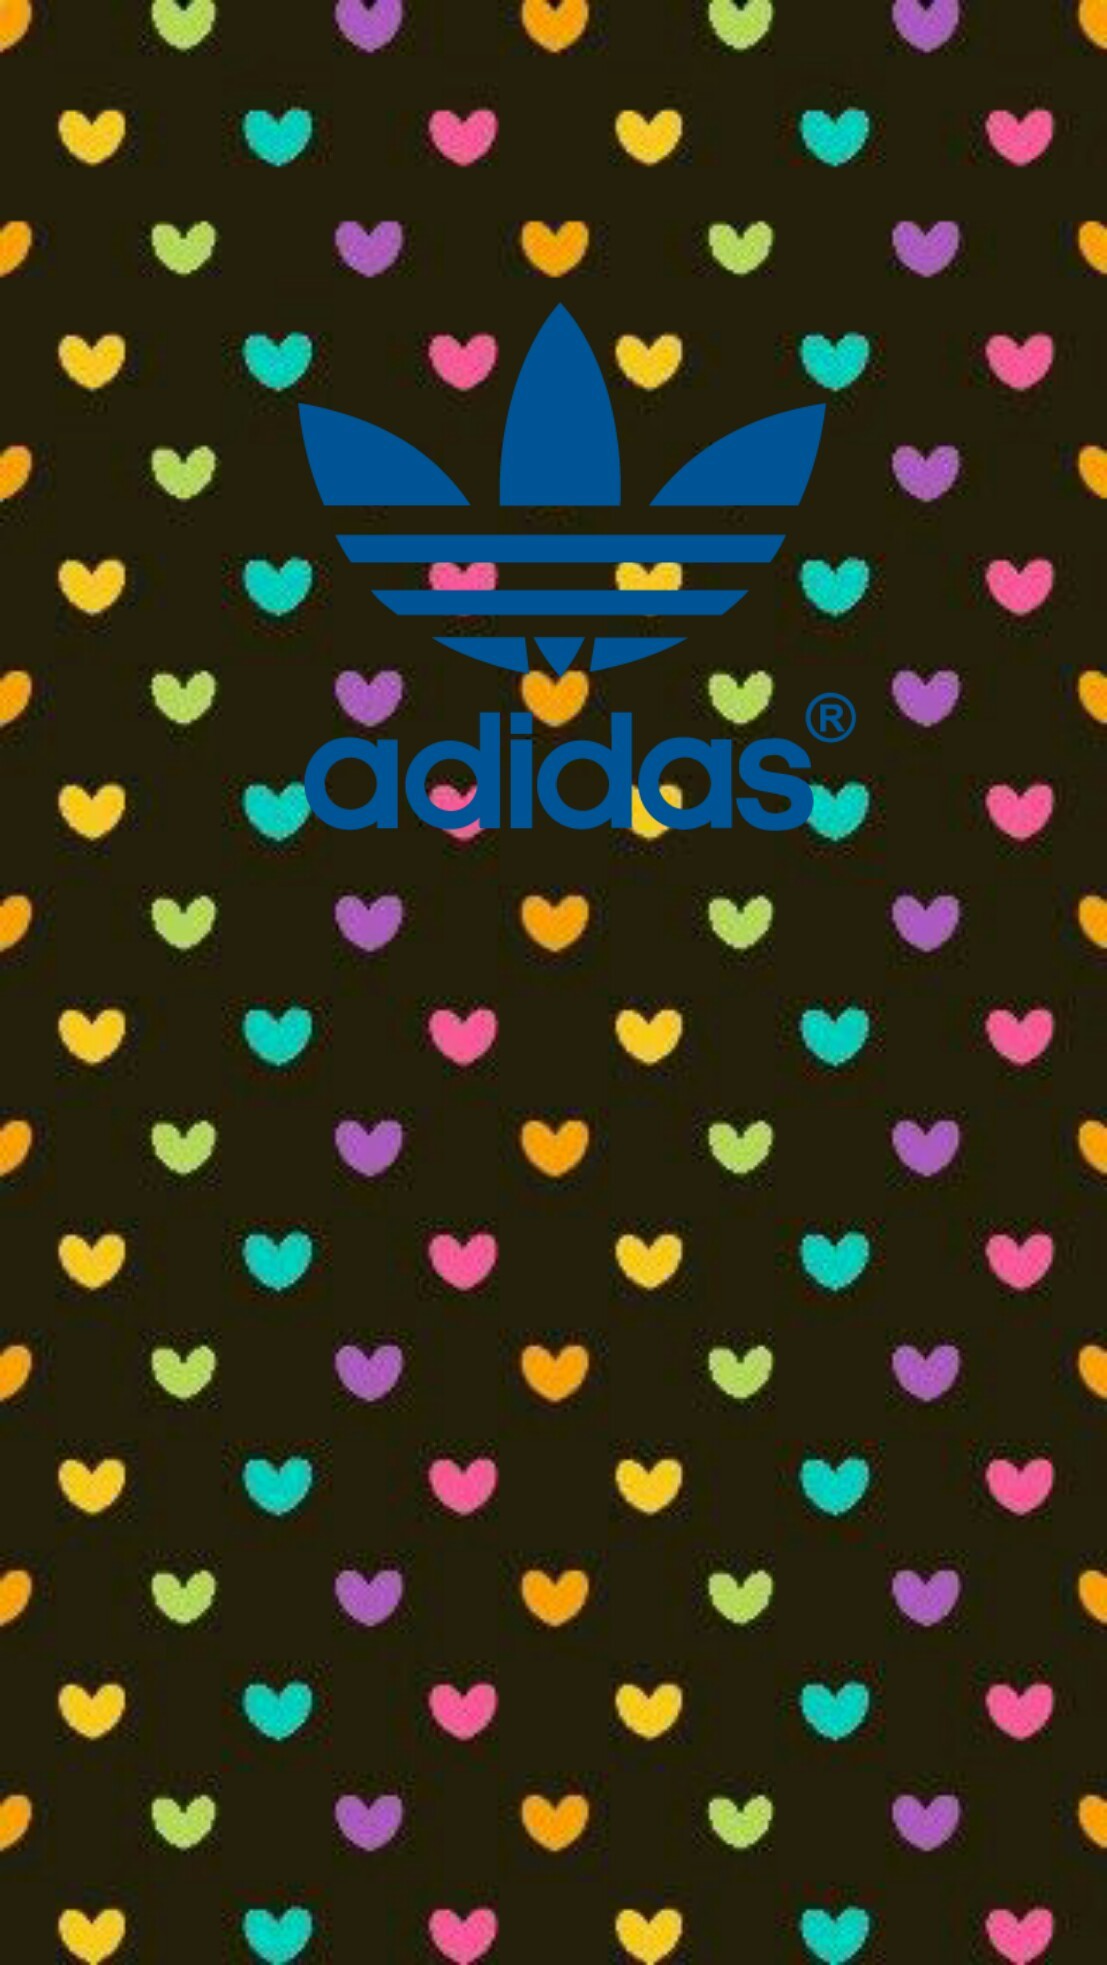 1107x1965 #adidas #black #wallpaper #android #iphone